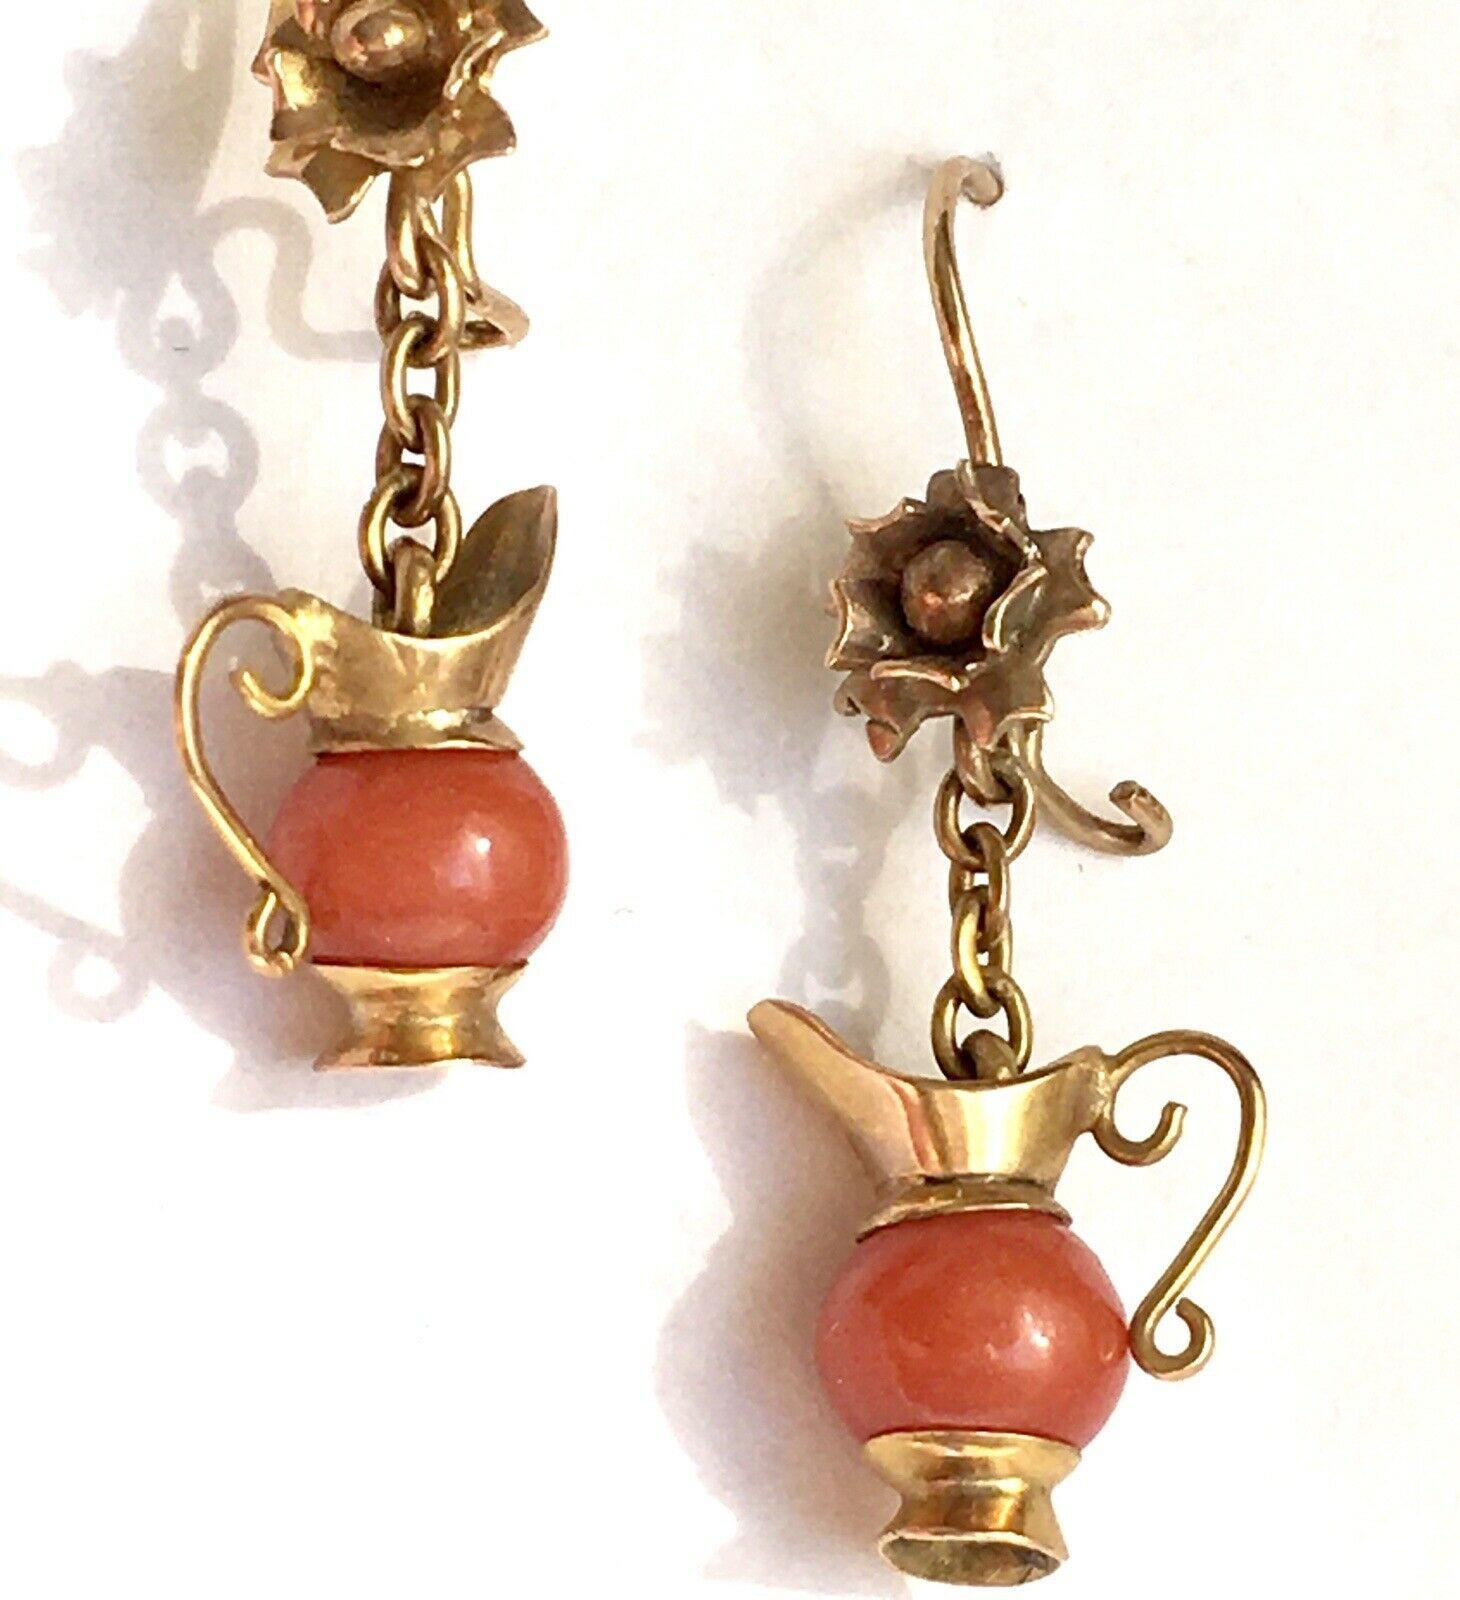 14K Yellow Gold Coral Dangling Art Deco Earrings

Length:  1 inch 
Hallmarks: None
Gold Content: 14 Karat
Gems: Italian Coral, 5.7 mm Mediterranean Coral bead  
Design: Possibly Etruscan Revival circa 1880, surely an Art Deco 1930s 
Country of Make: